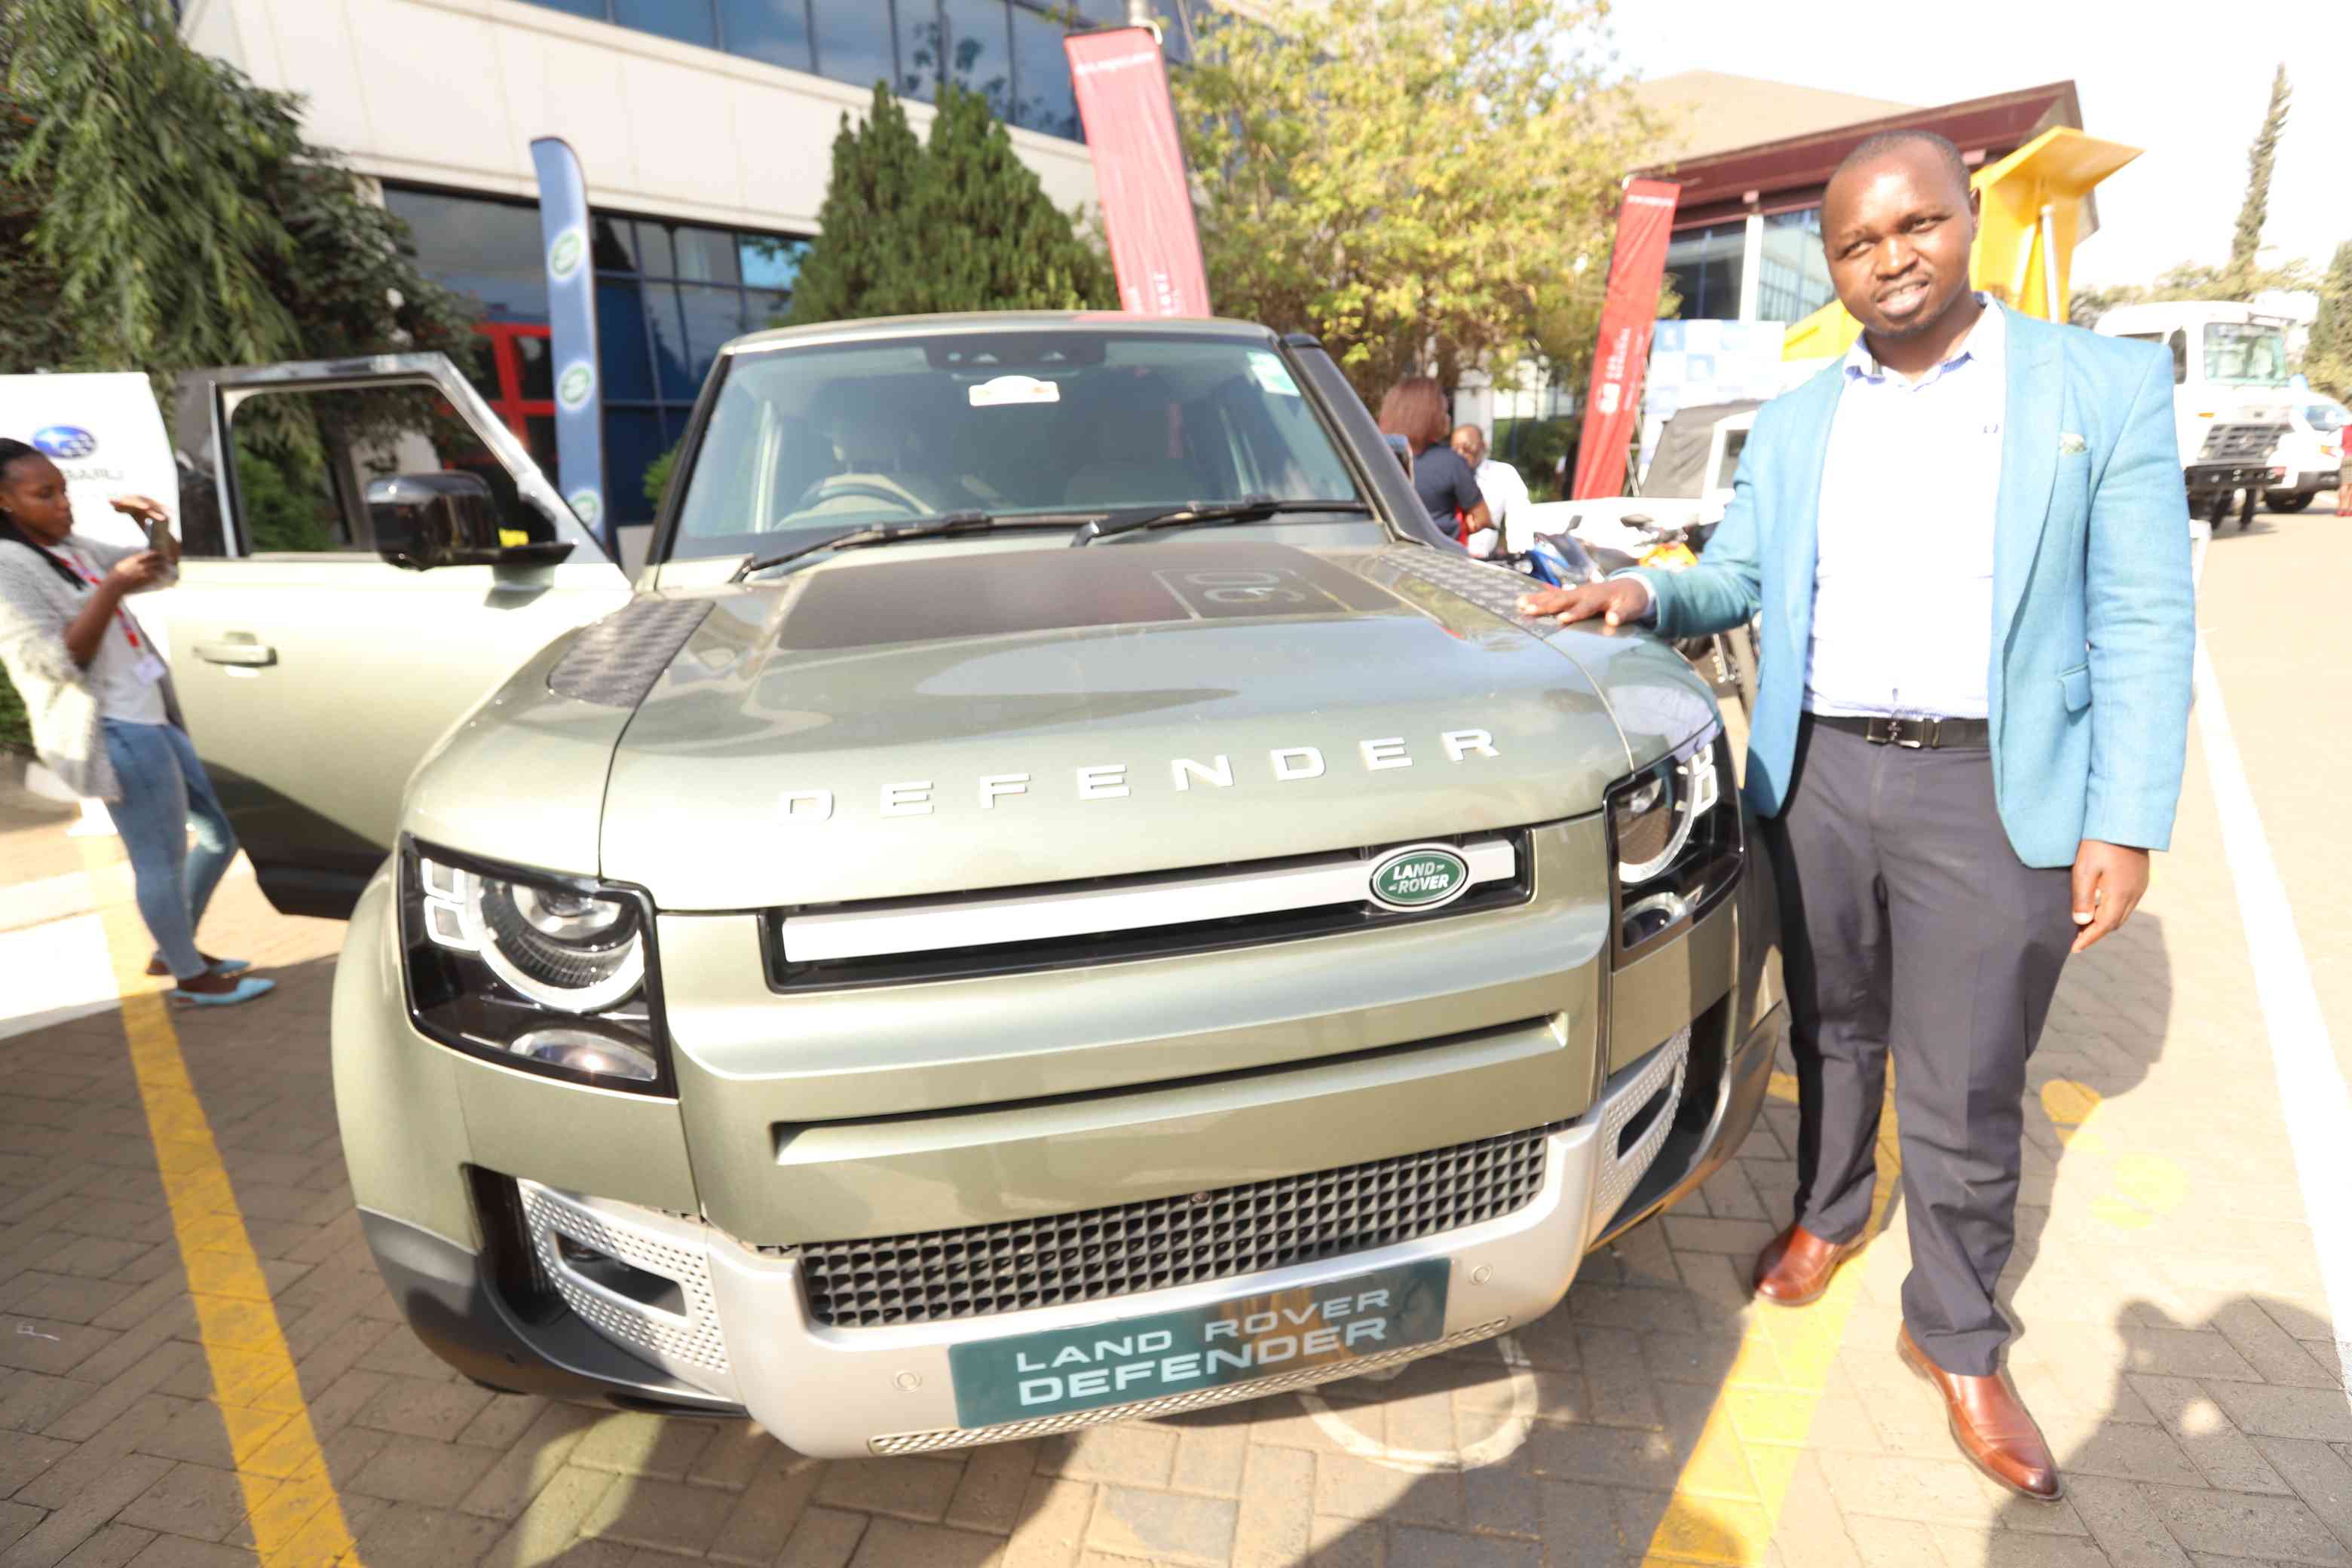 A defender showcased at Standard Group